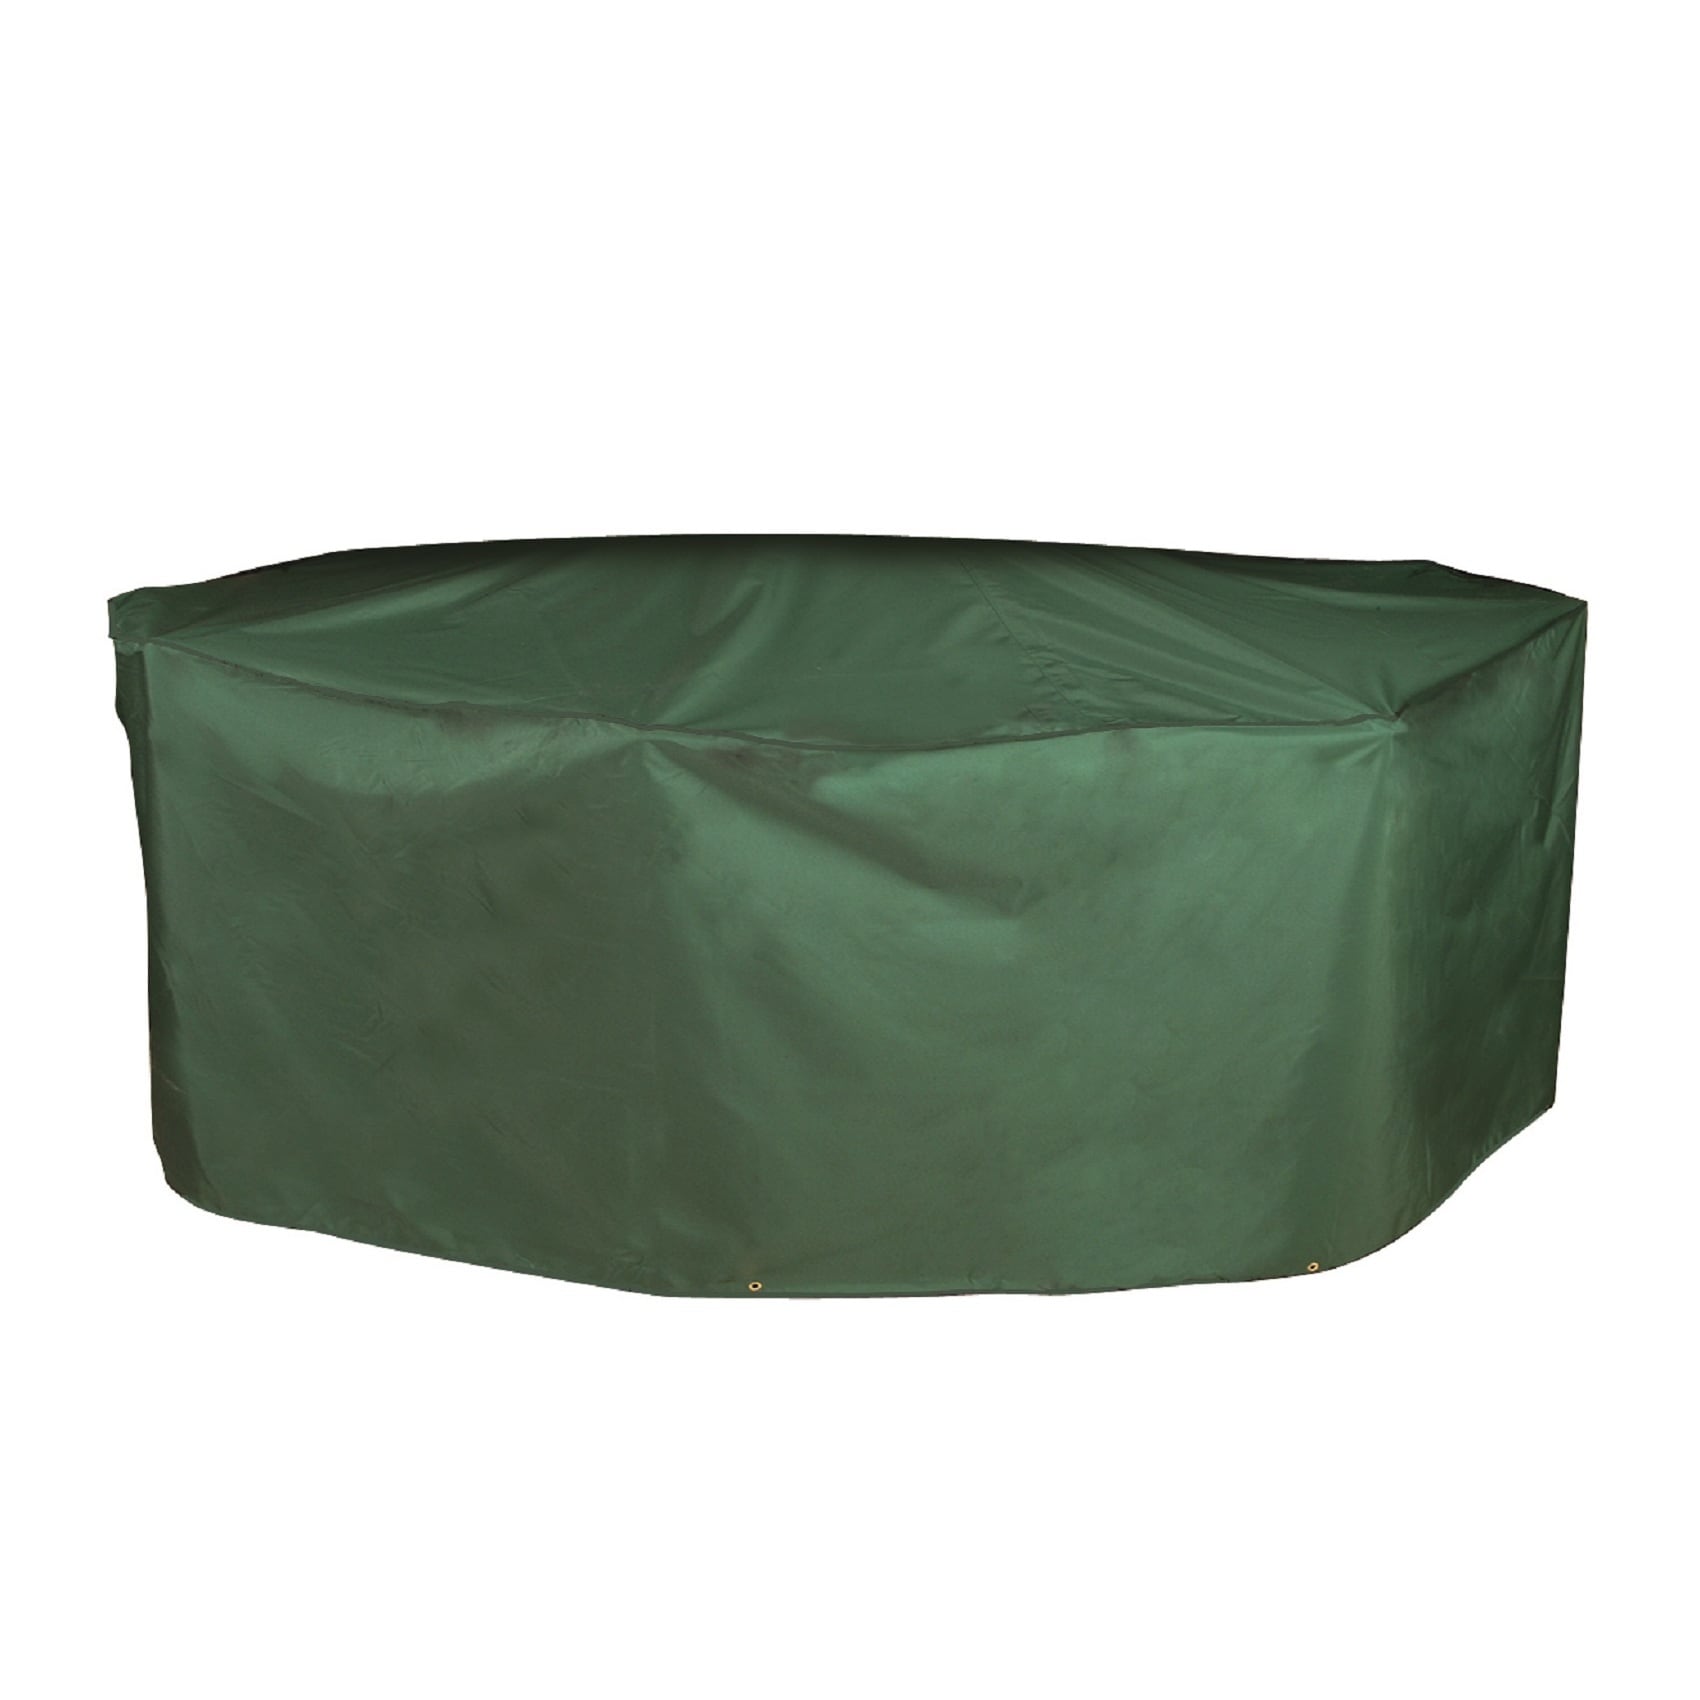 Bosmere C537 Oval / Rectangular Table and Chairs Cover - 126 x 75 in. - Green - image 2 of 4